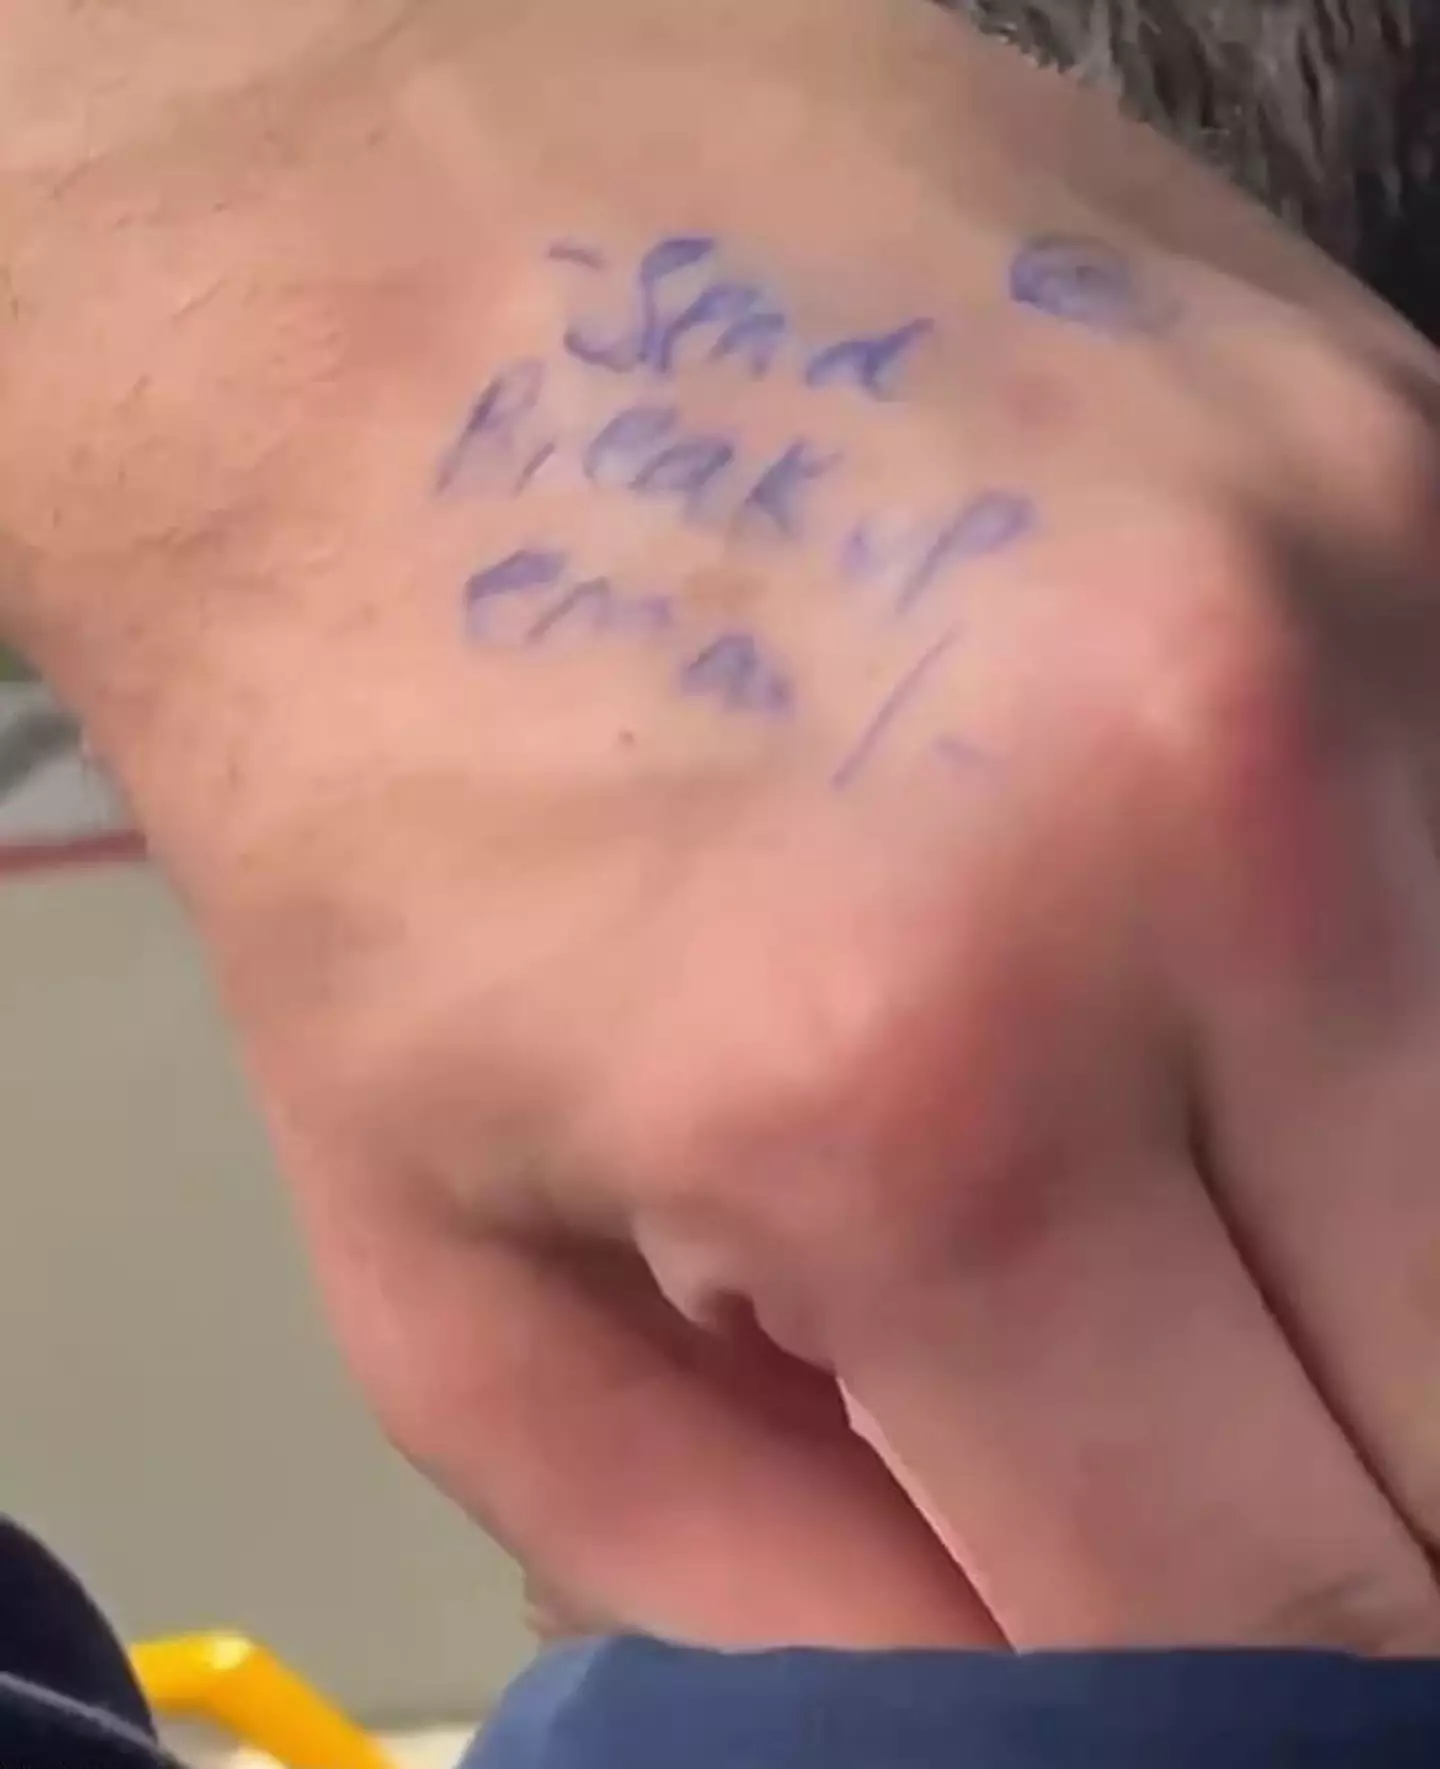 A random train commuter in Australia has shocked the internet after the 'gutless' note on his hand went viral.